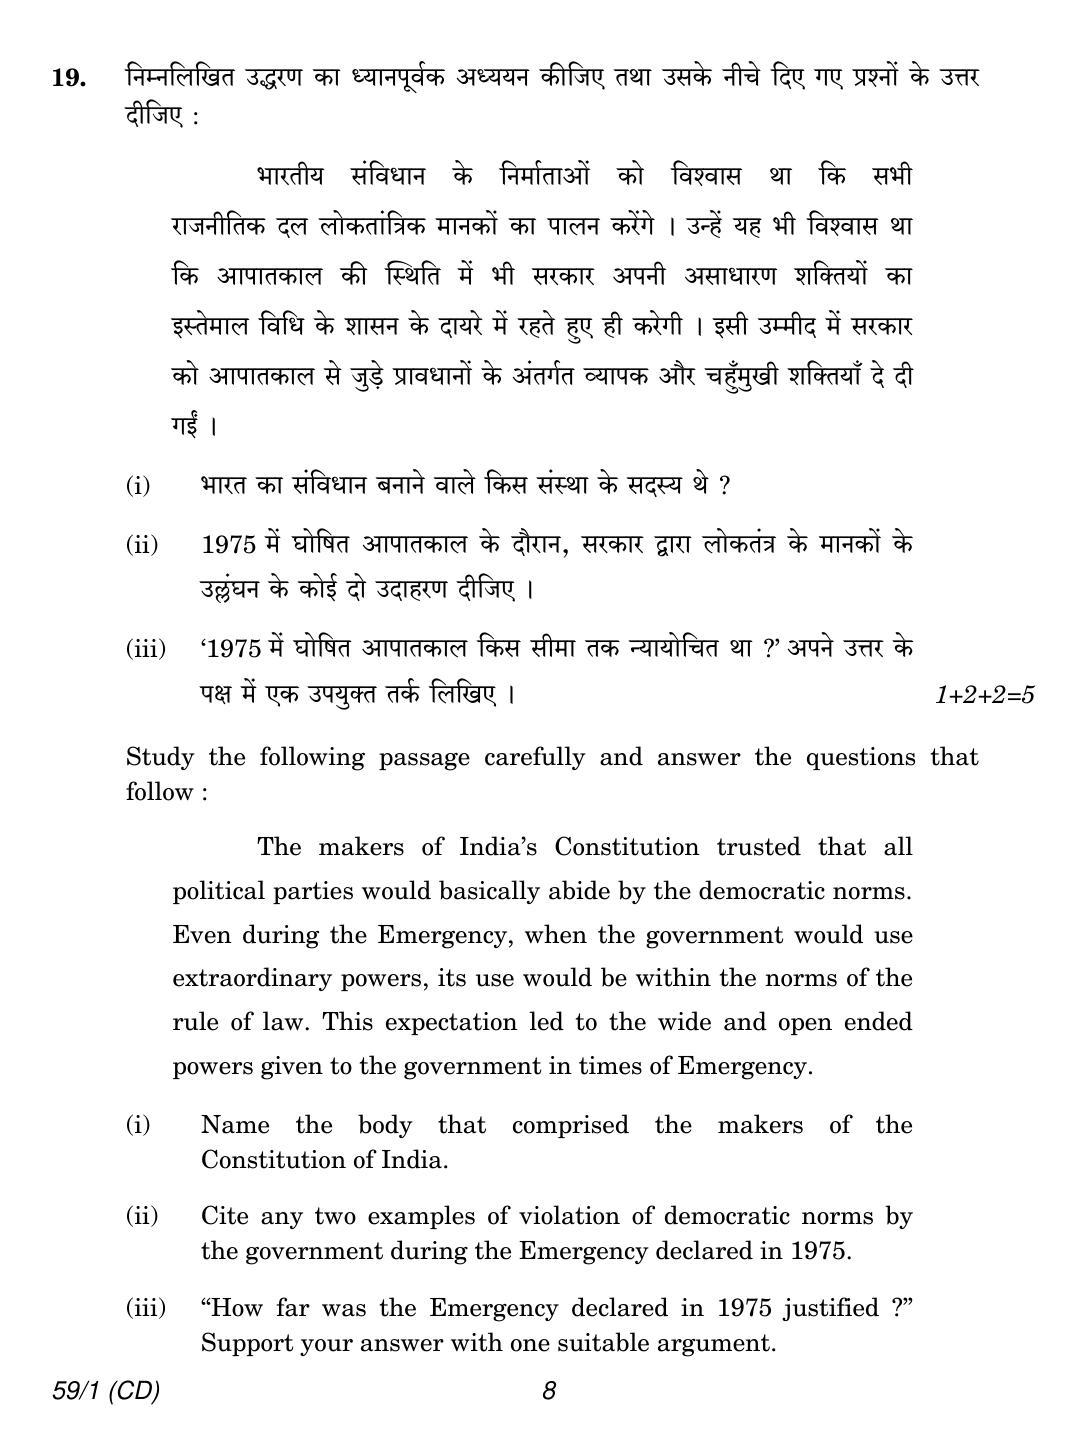 CBSE Class 12 59-1 POLITICAL SCIENCE CD 2018 Question Paper - Page 8